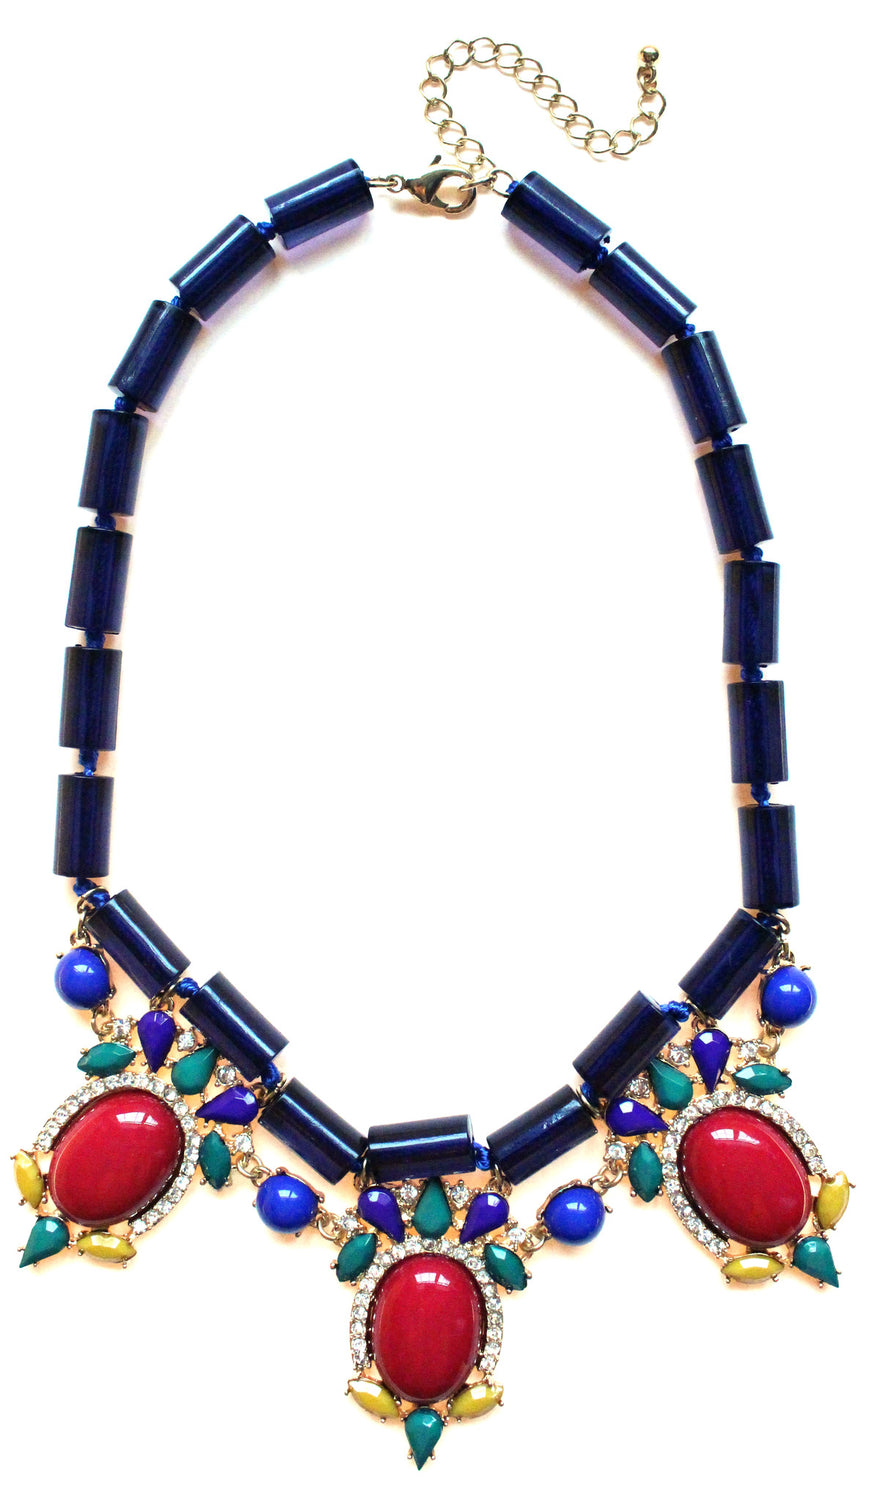 Colorful Beaded & Jeweled Statement Necklace- Navy & Red